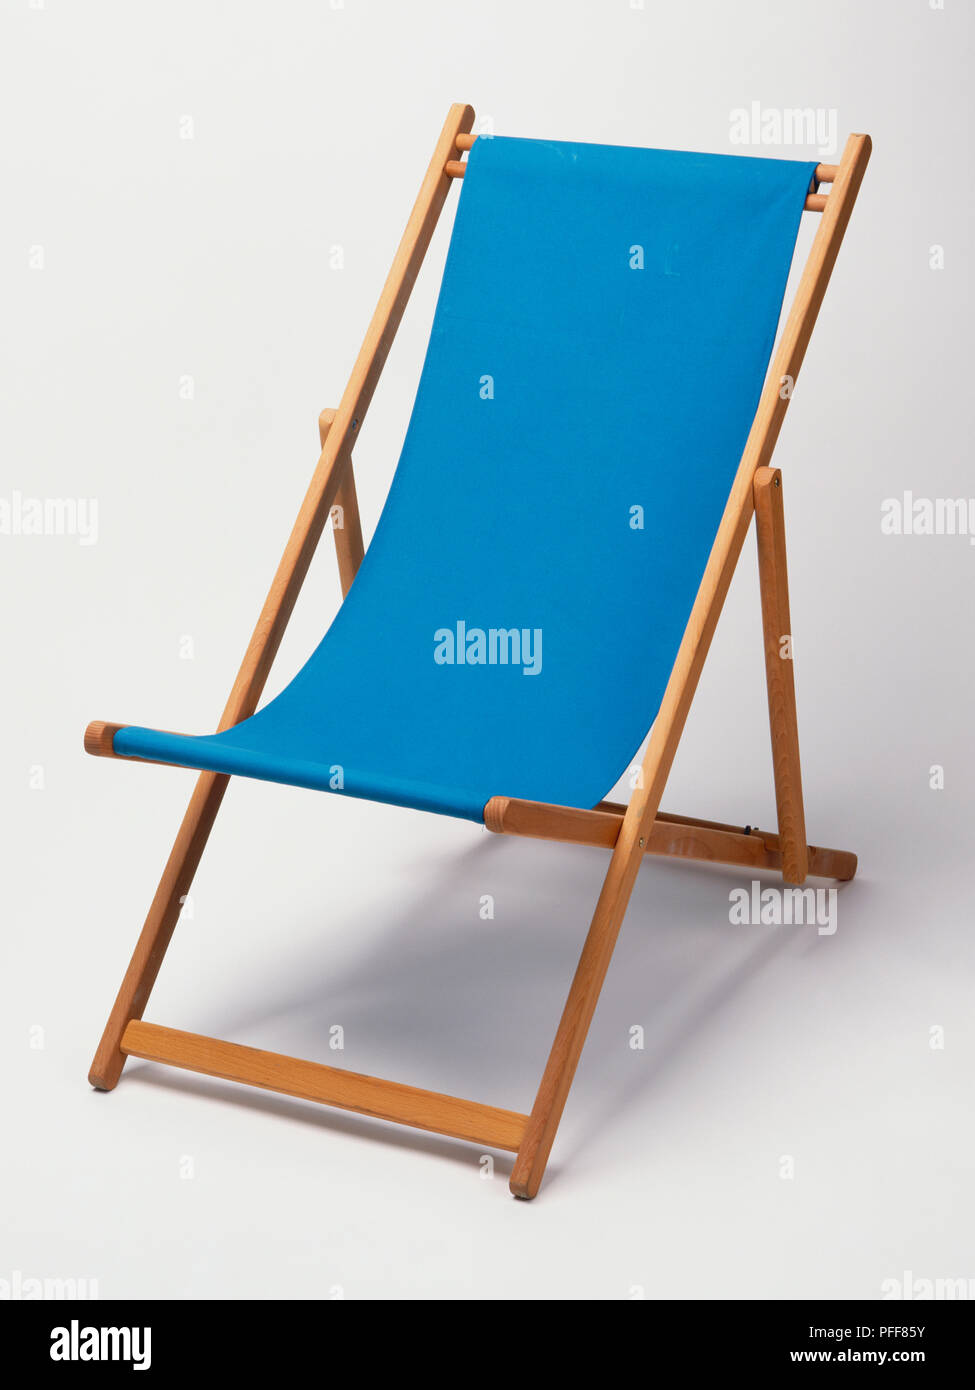 Deck chair, wooden frame, sky blue canvas Stock Photo